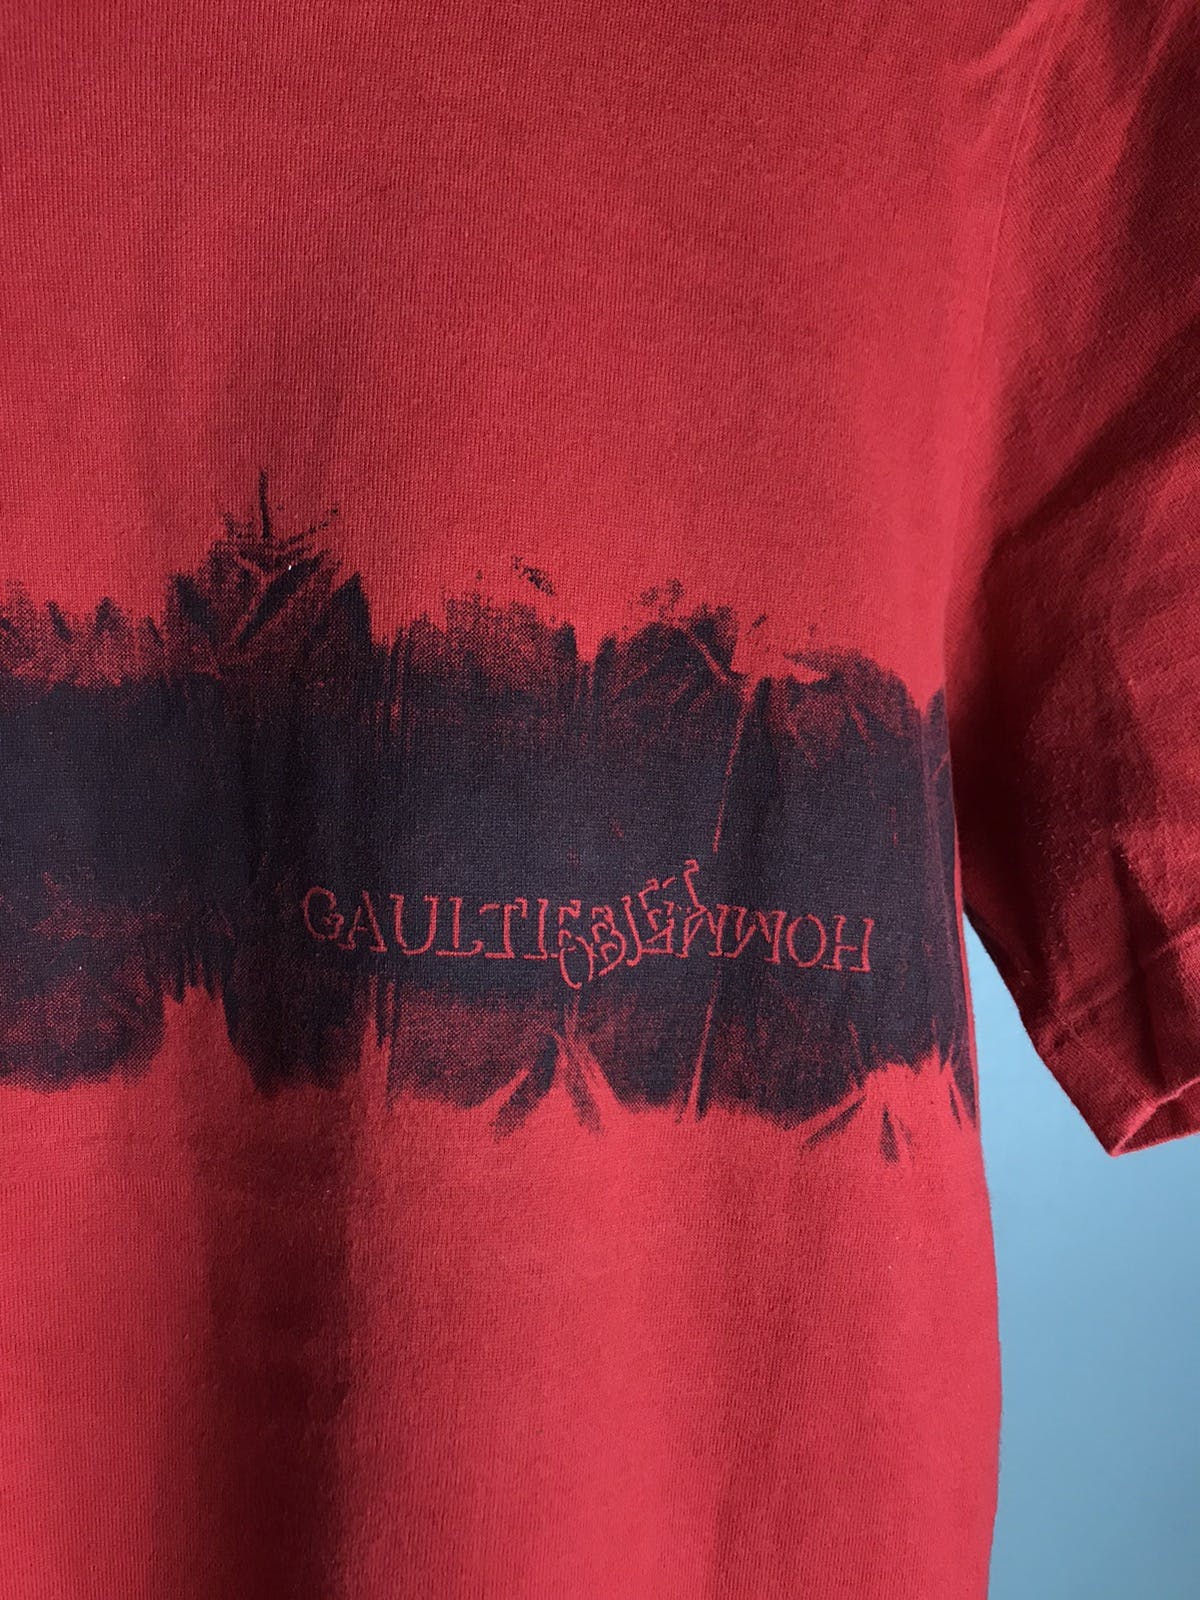 Vintage Gaultier Homme Object tee - 7